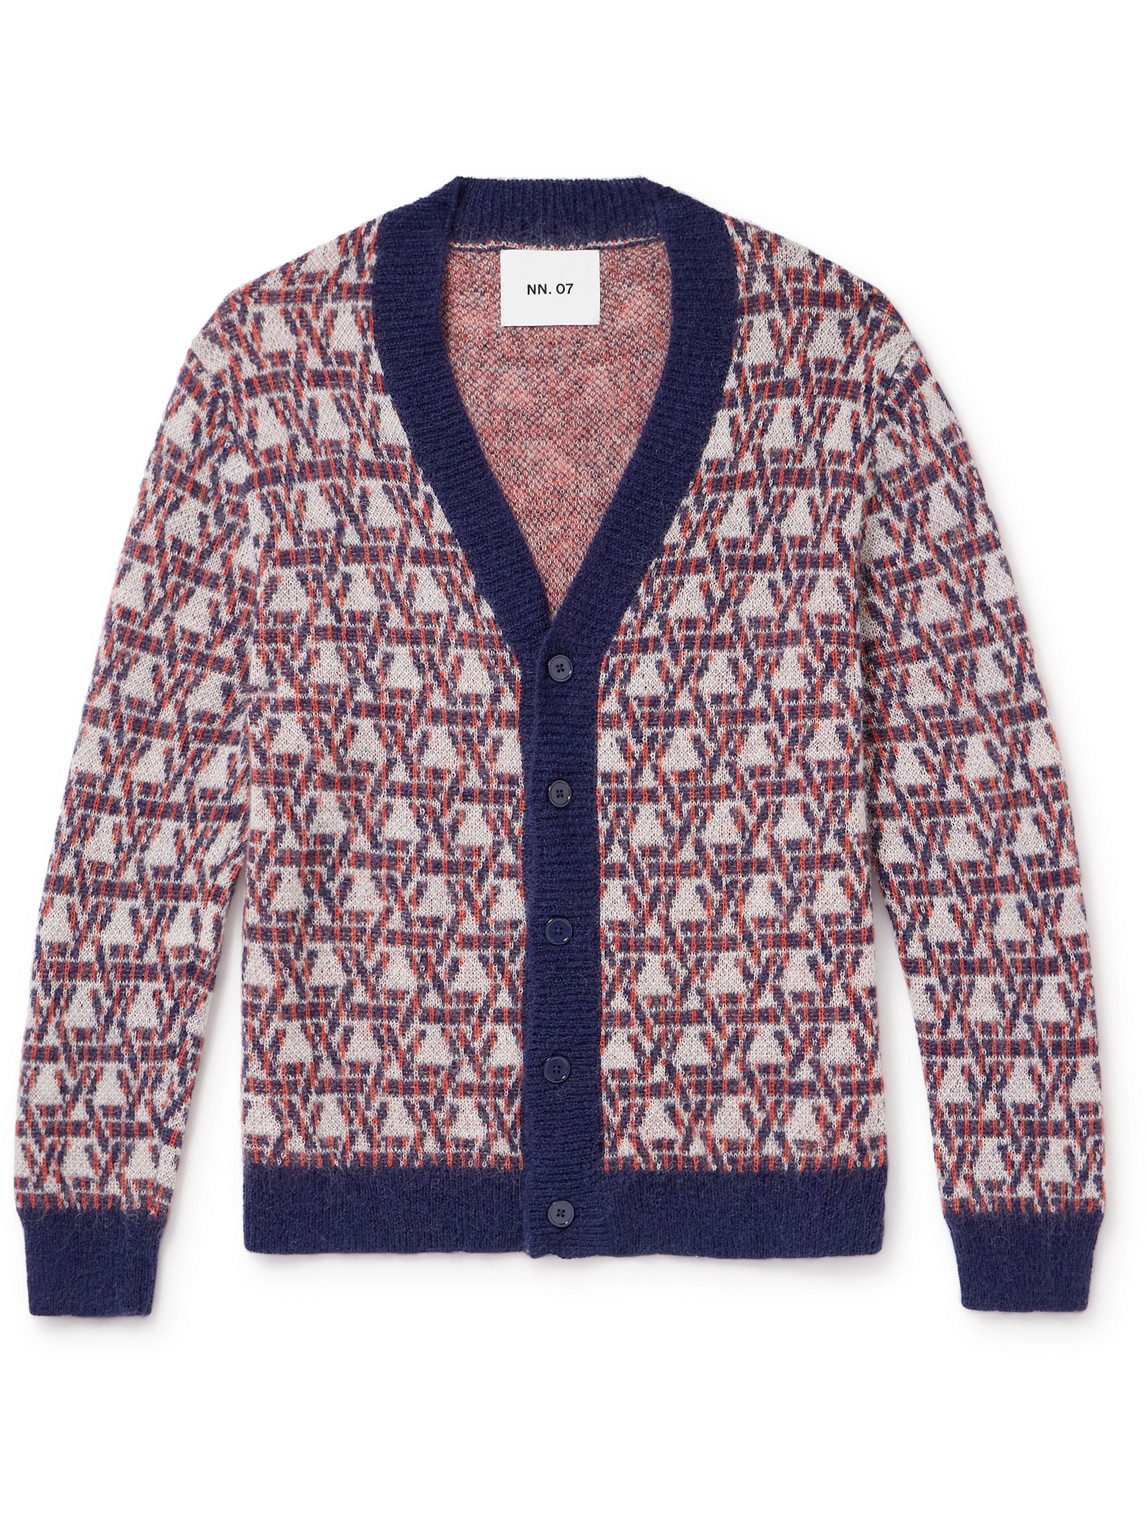 Nn07 Billy 6594 Brushed Wool And Mohair-blend Jacquard Cardigan In Multi